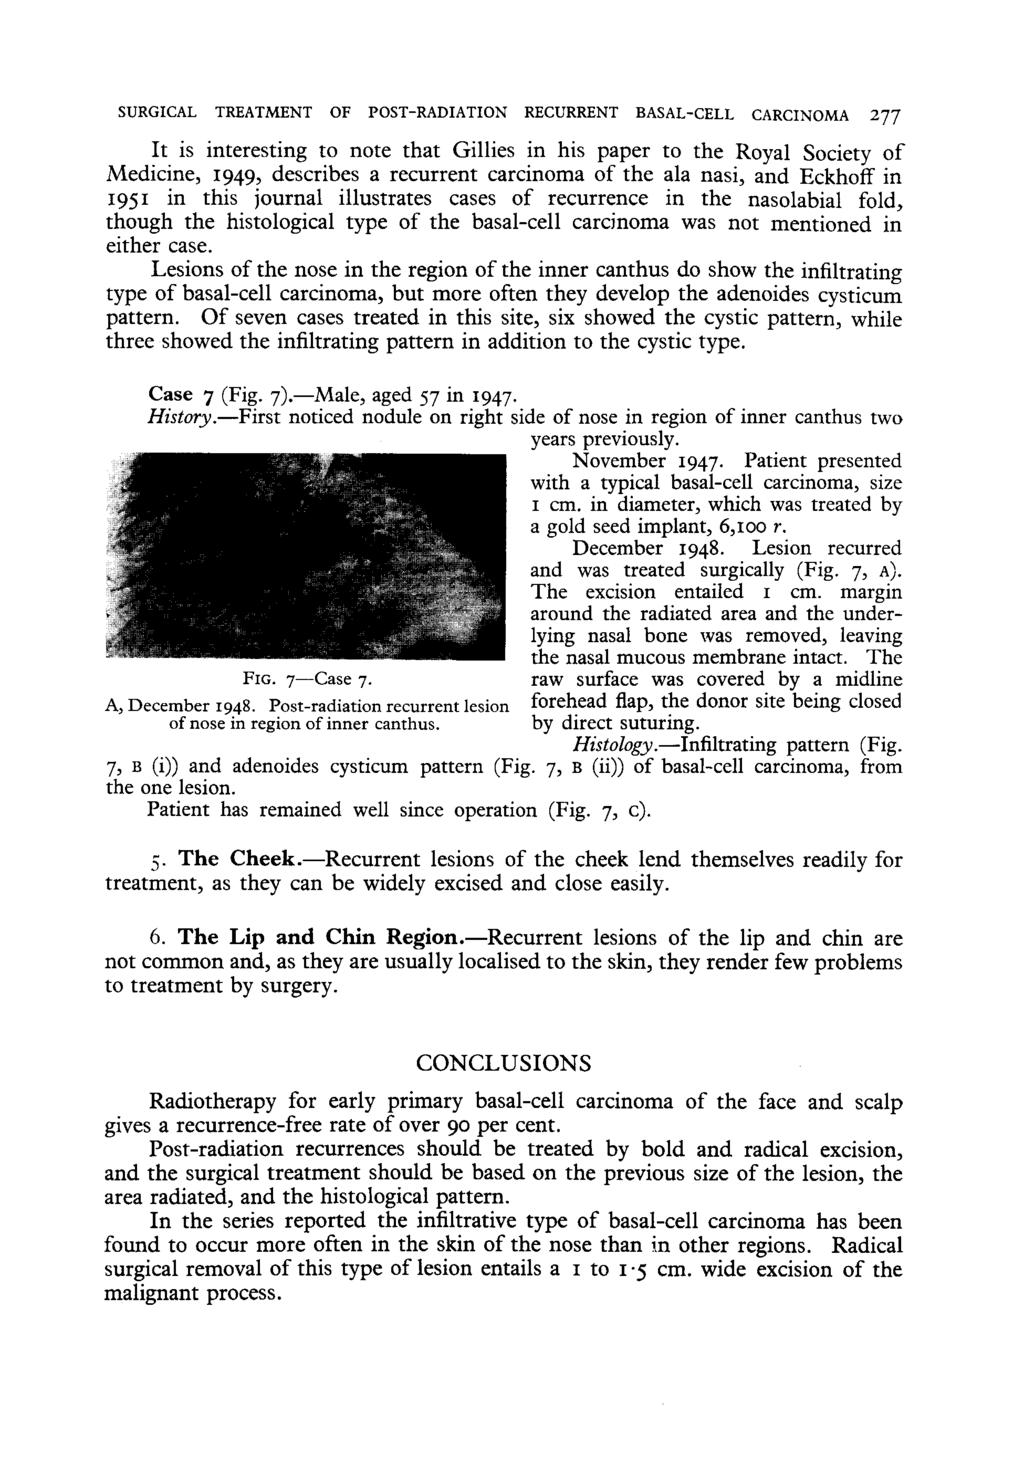 SURGICAL TREATMENT OF POST-RADIATION RECURRENT BASAL-CELL CARCINOMA 277 It is interesting to note that Gillies in his paper to the Royal Society of Medicine, 1949, describes a recurrent carcinoma of